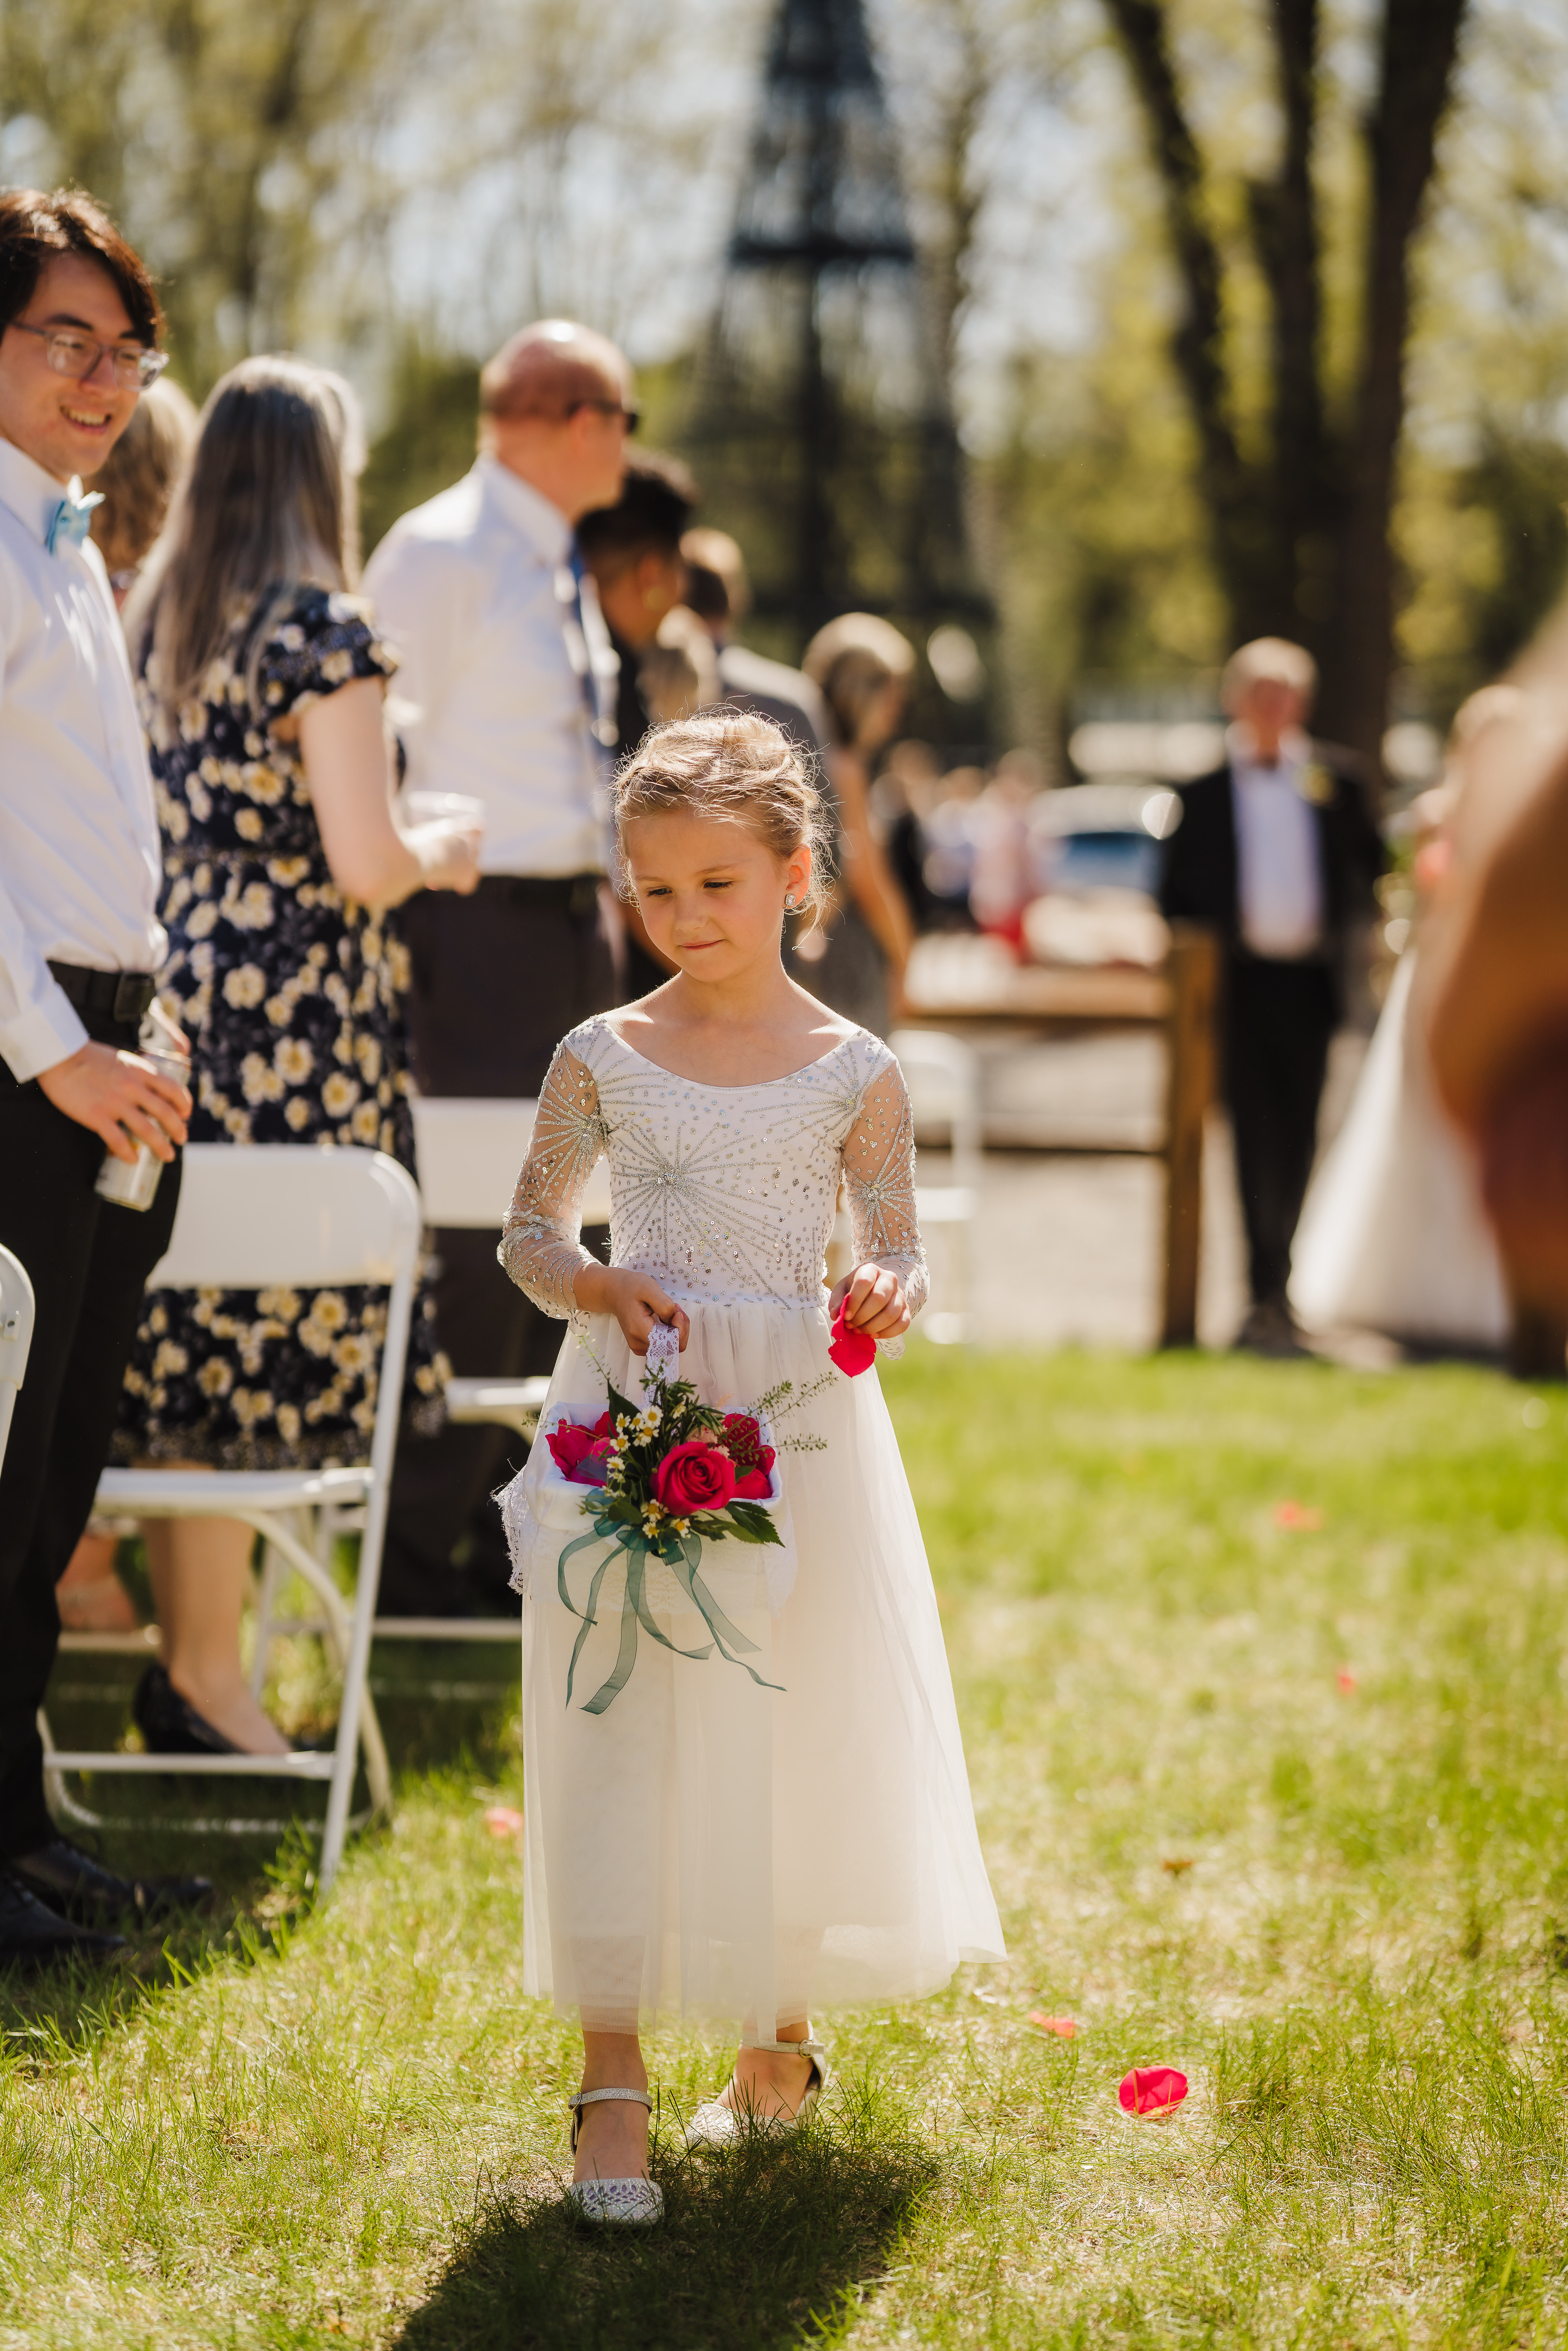 A sweet Wisconsin flower girl drops pink rose petals down the aisle in a white flower girl dress. Pink wedding flowers Lace flower girl dress Flower girl inspo #forestgreenwedding #rusticweddingvenue #weddingplanning #wisconsinweddingphotographer #wisconsinweddingvenue
